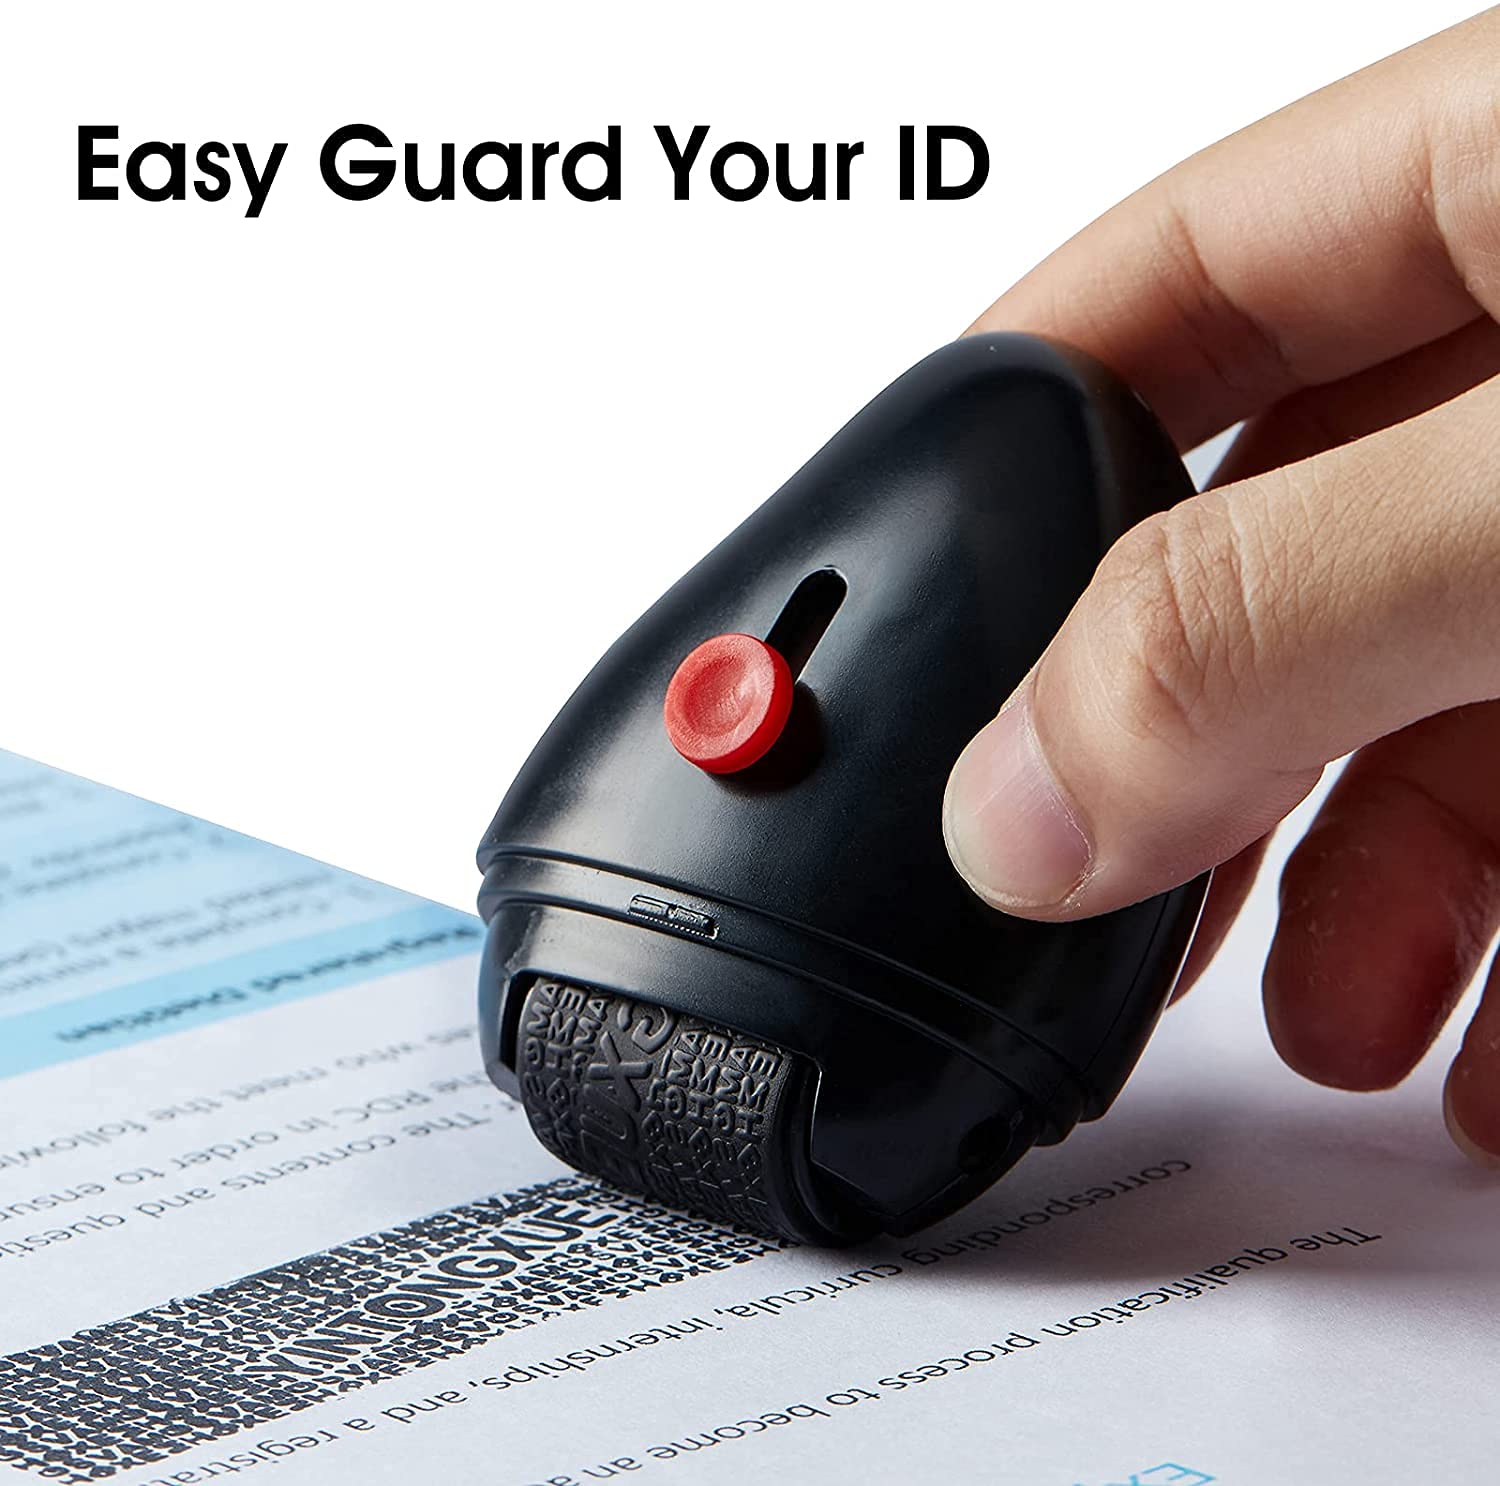 SecureSwipe Identity Protection Roller Stamp - Guard Your Confidential Information with Ease